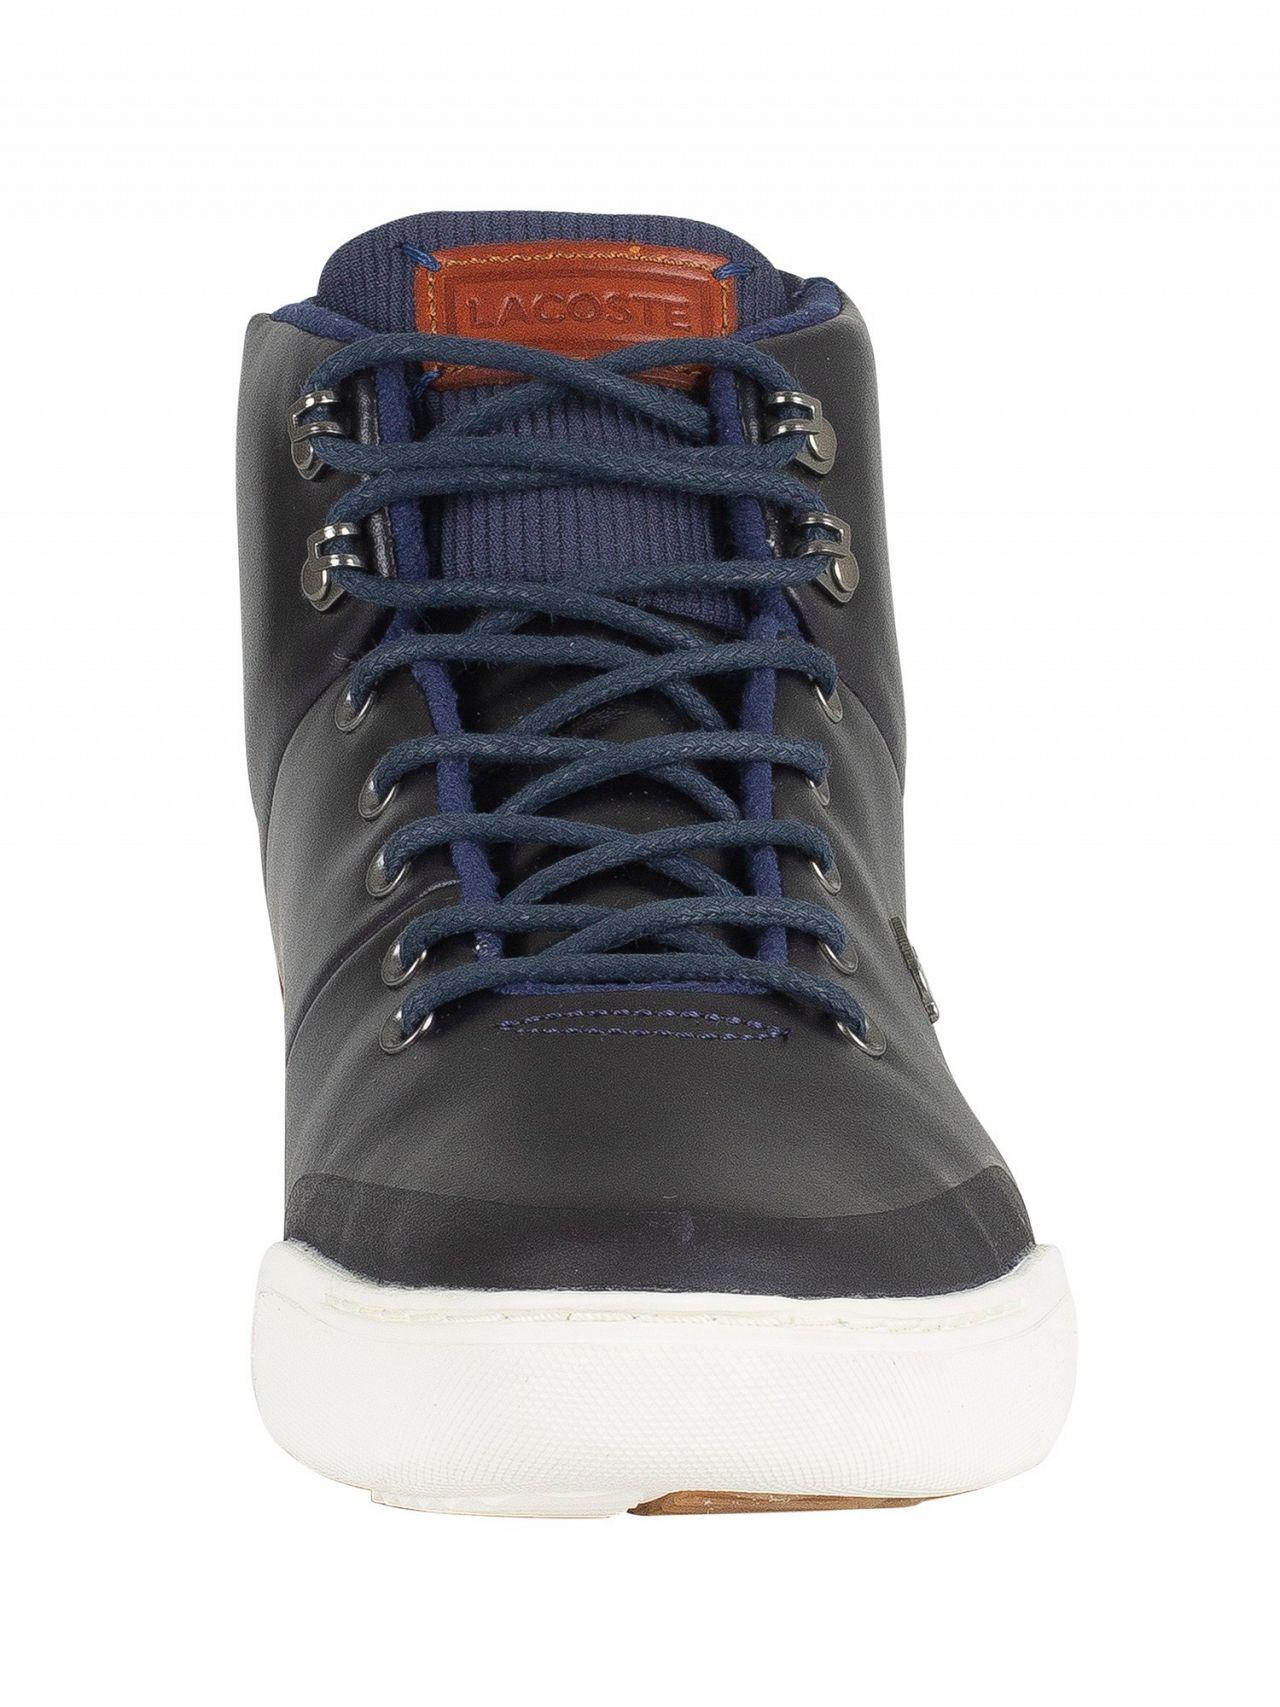 New Mens Lacoste Navy Explorateur Leather Trainers Hi Top Lace Up